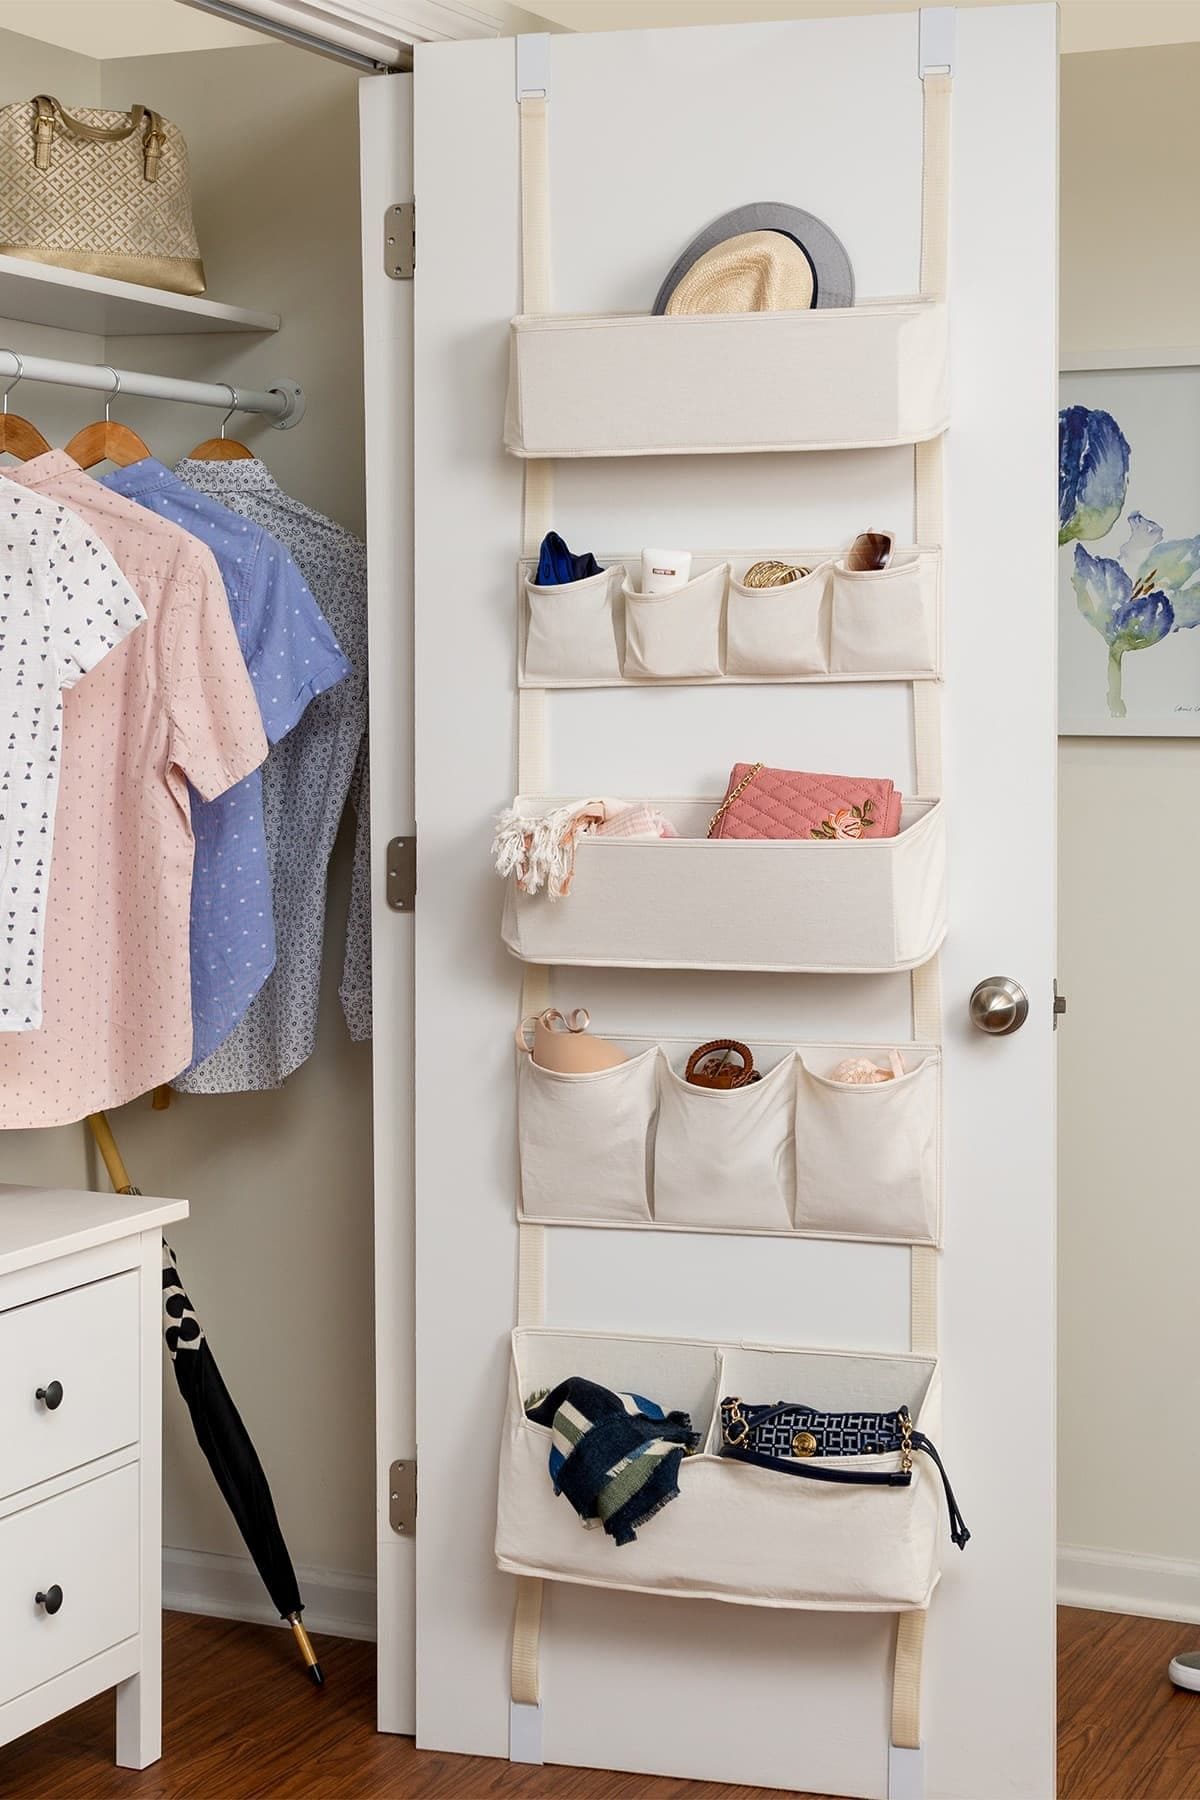 20 fascinating over the door storage ideas to put in your bag - 161